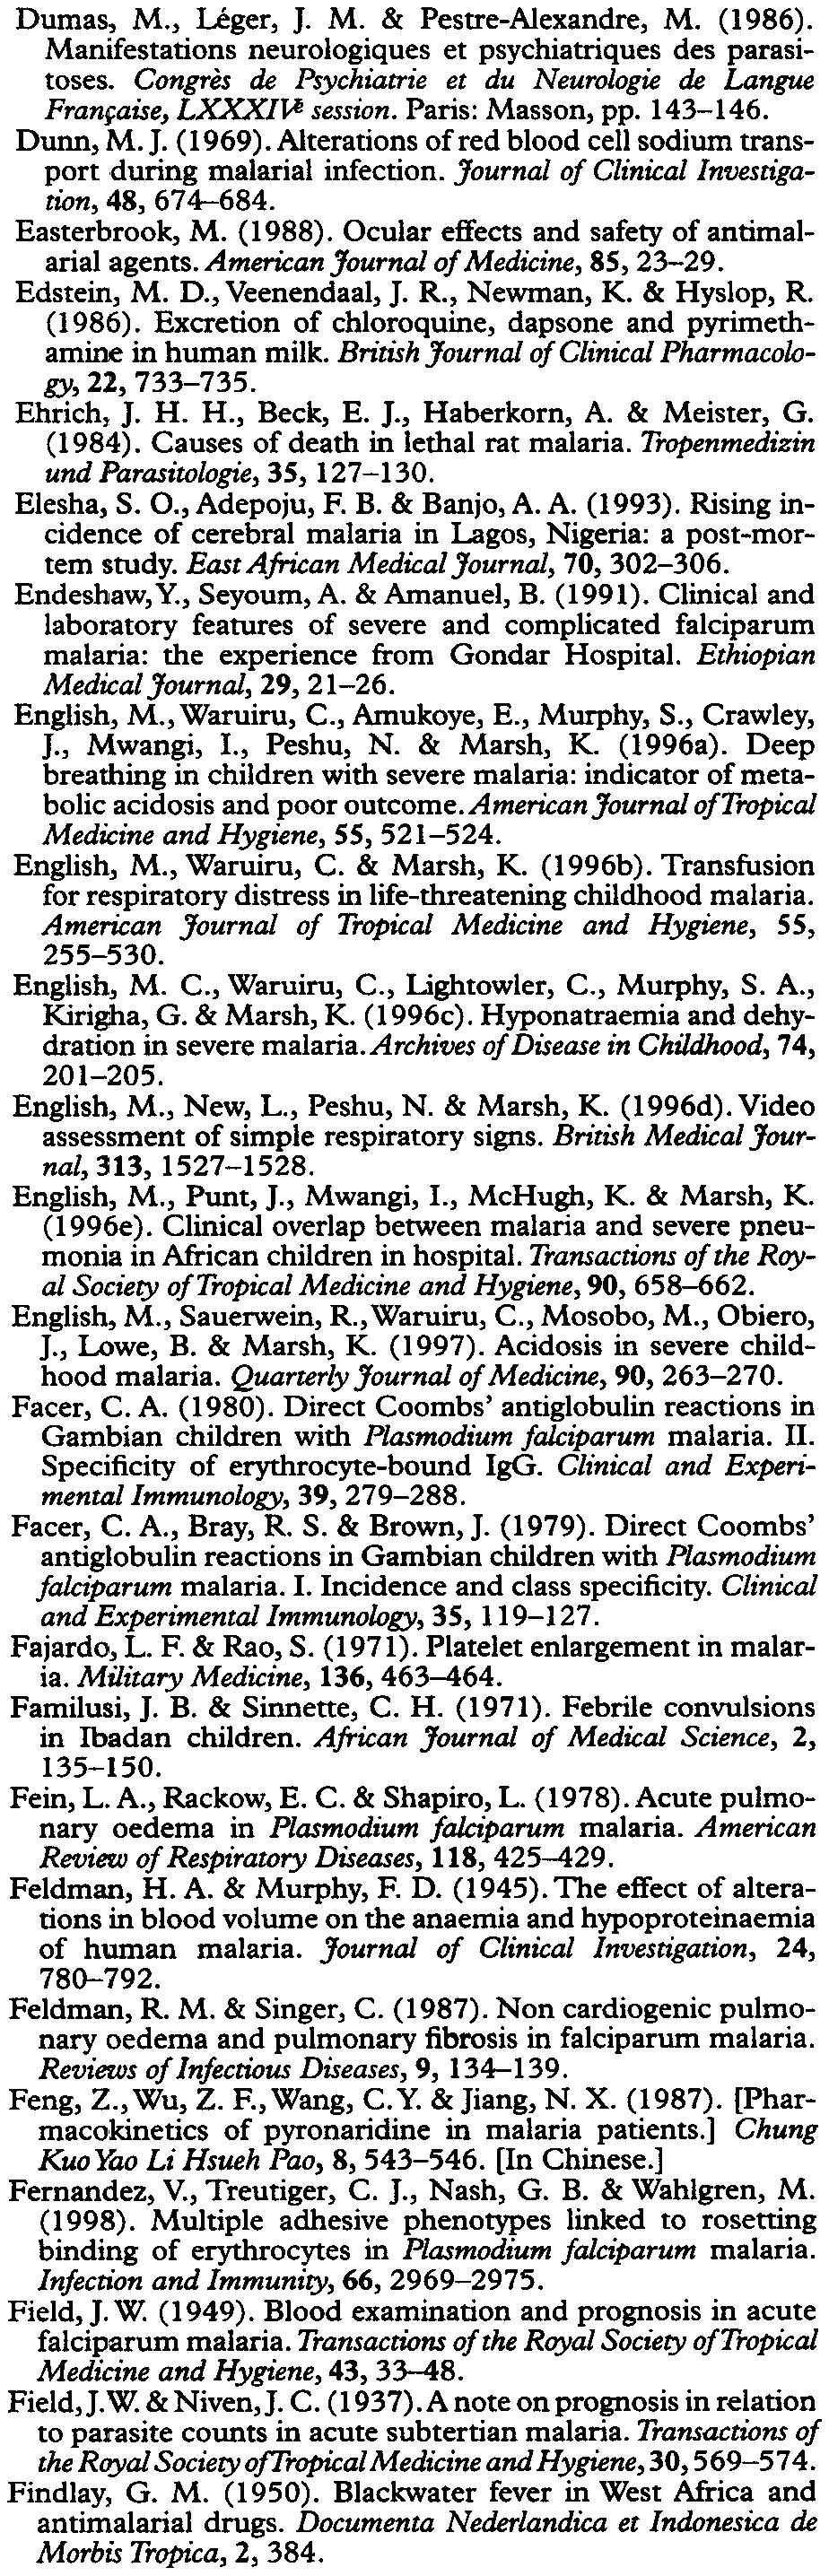 (1995). The effect of plasma free fatty acids and long-chain triglycerides on glucose metabolism in uncomplicated falciparum malaria.